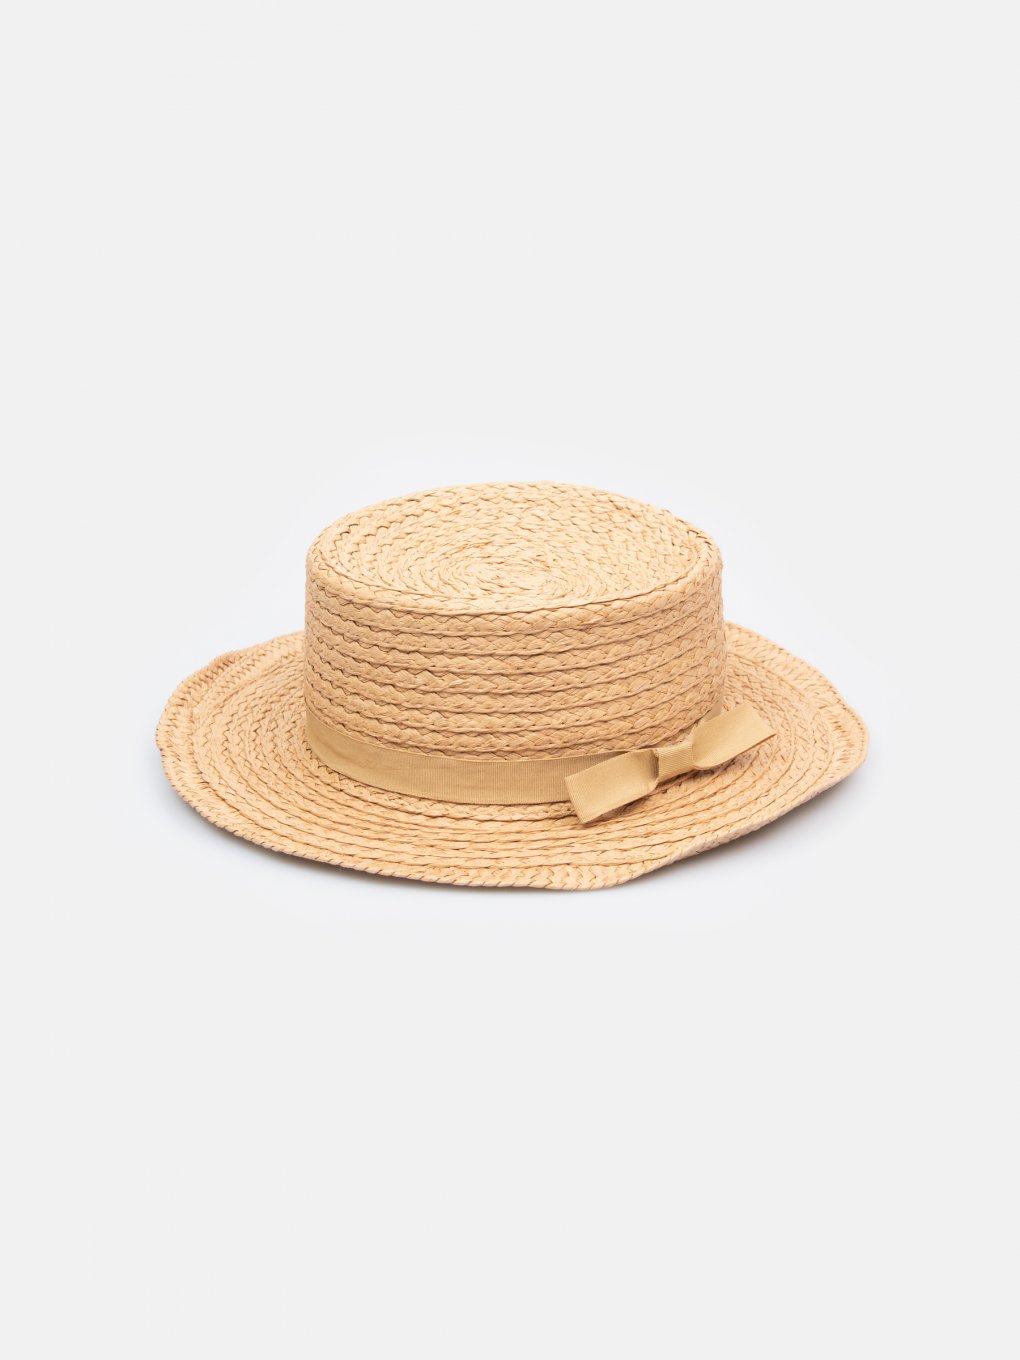 Boater straw hat with bow